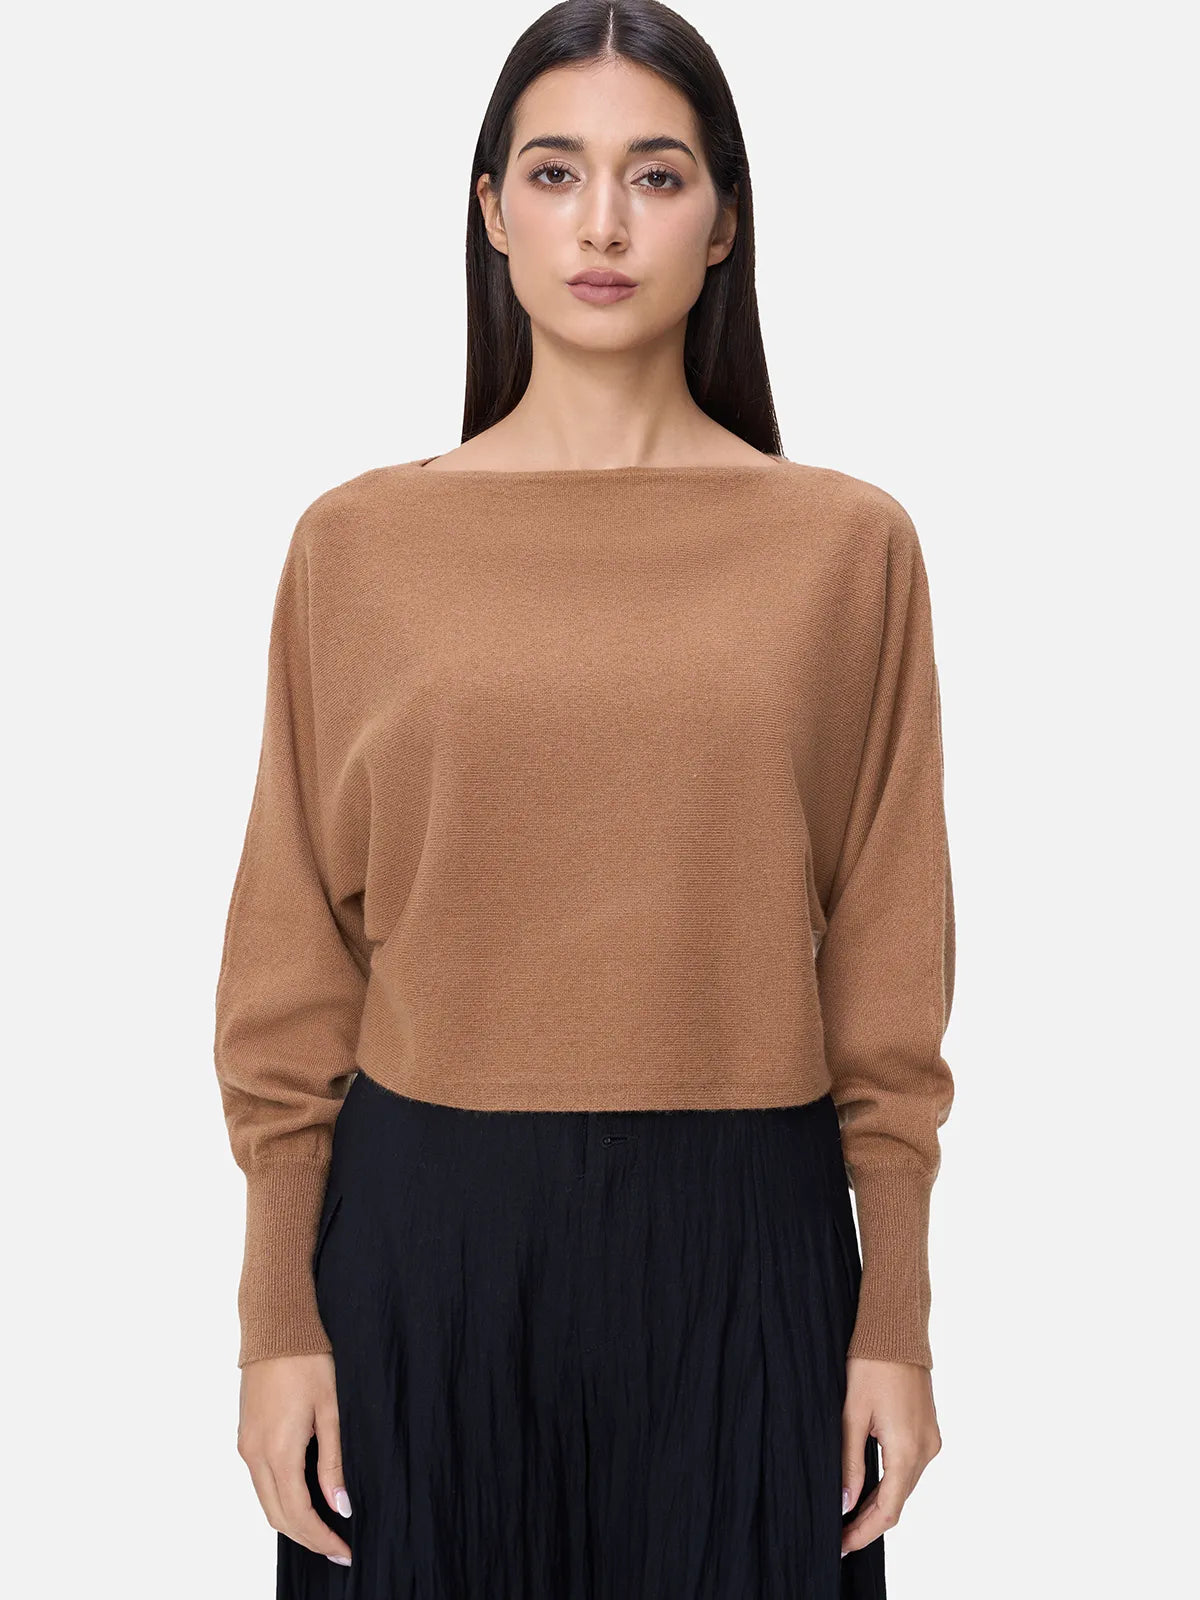 Chic Short-Length Batwing Sleeve Cashmere Sweater in Solid Color.